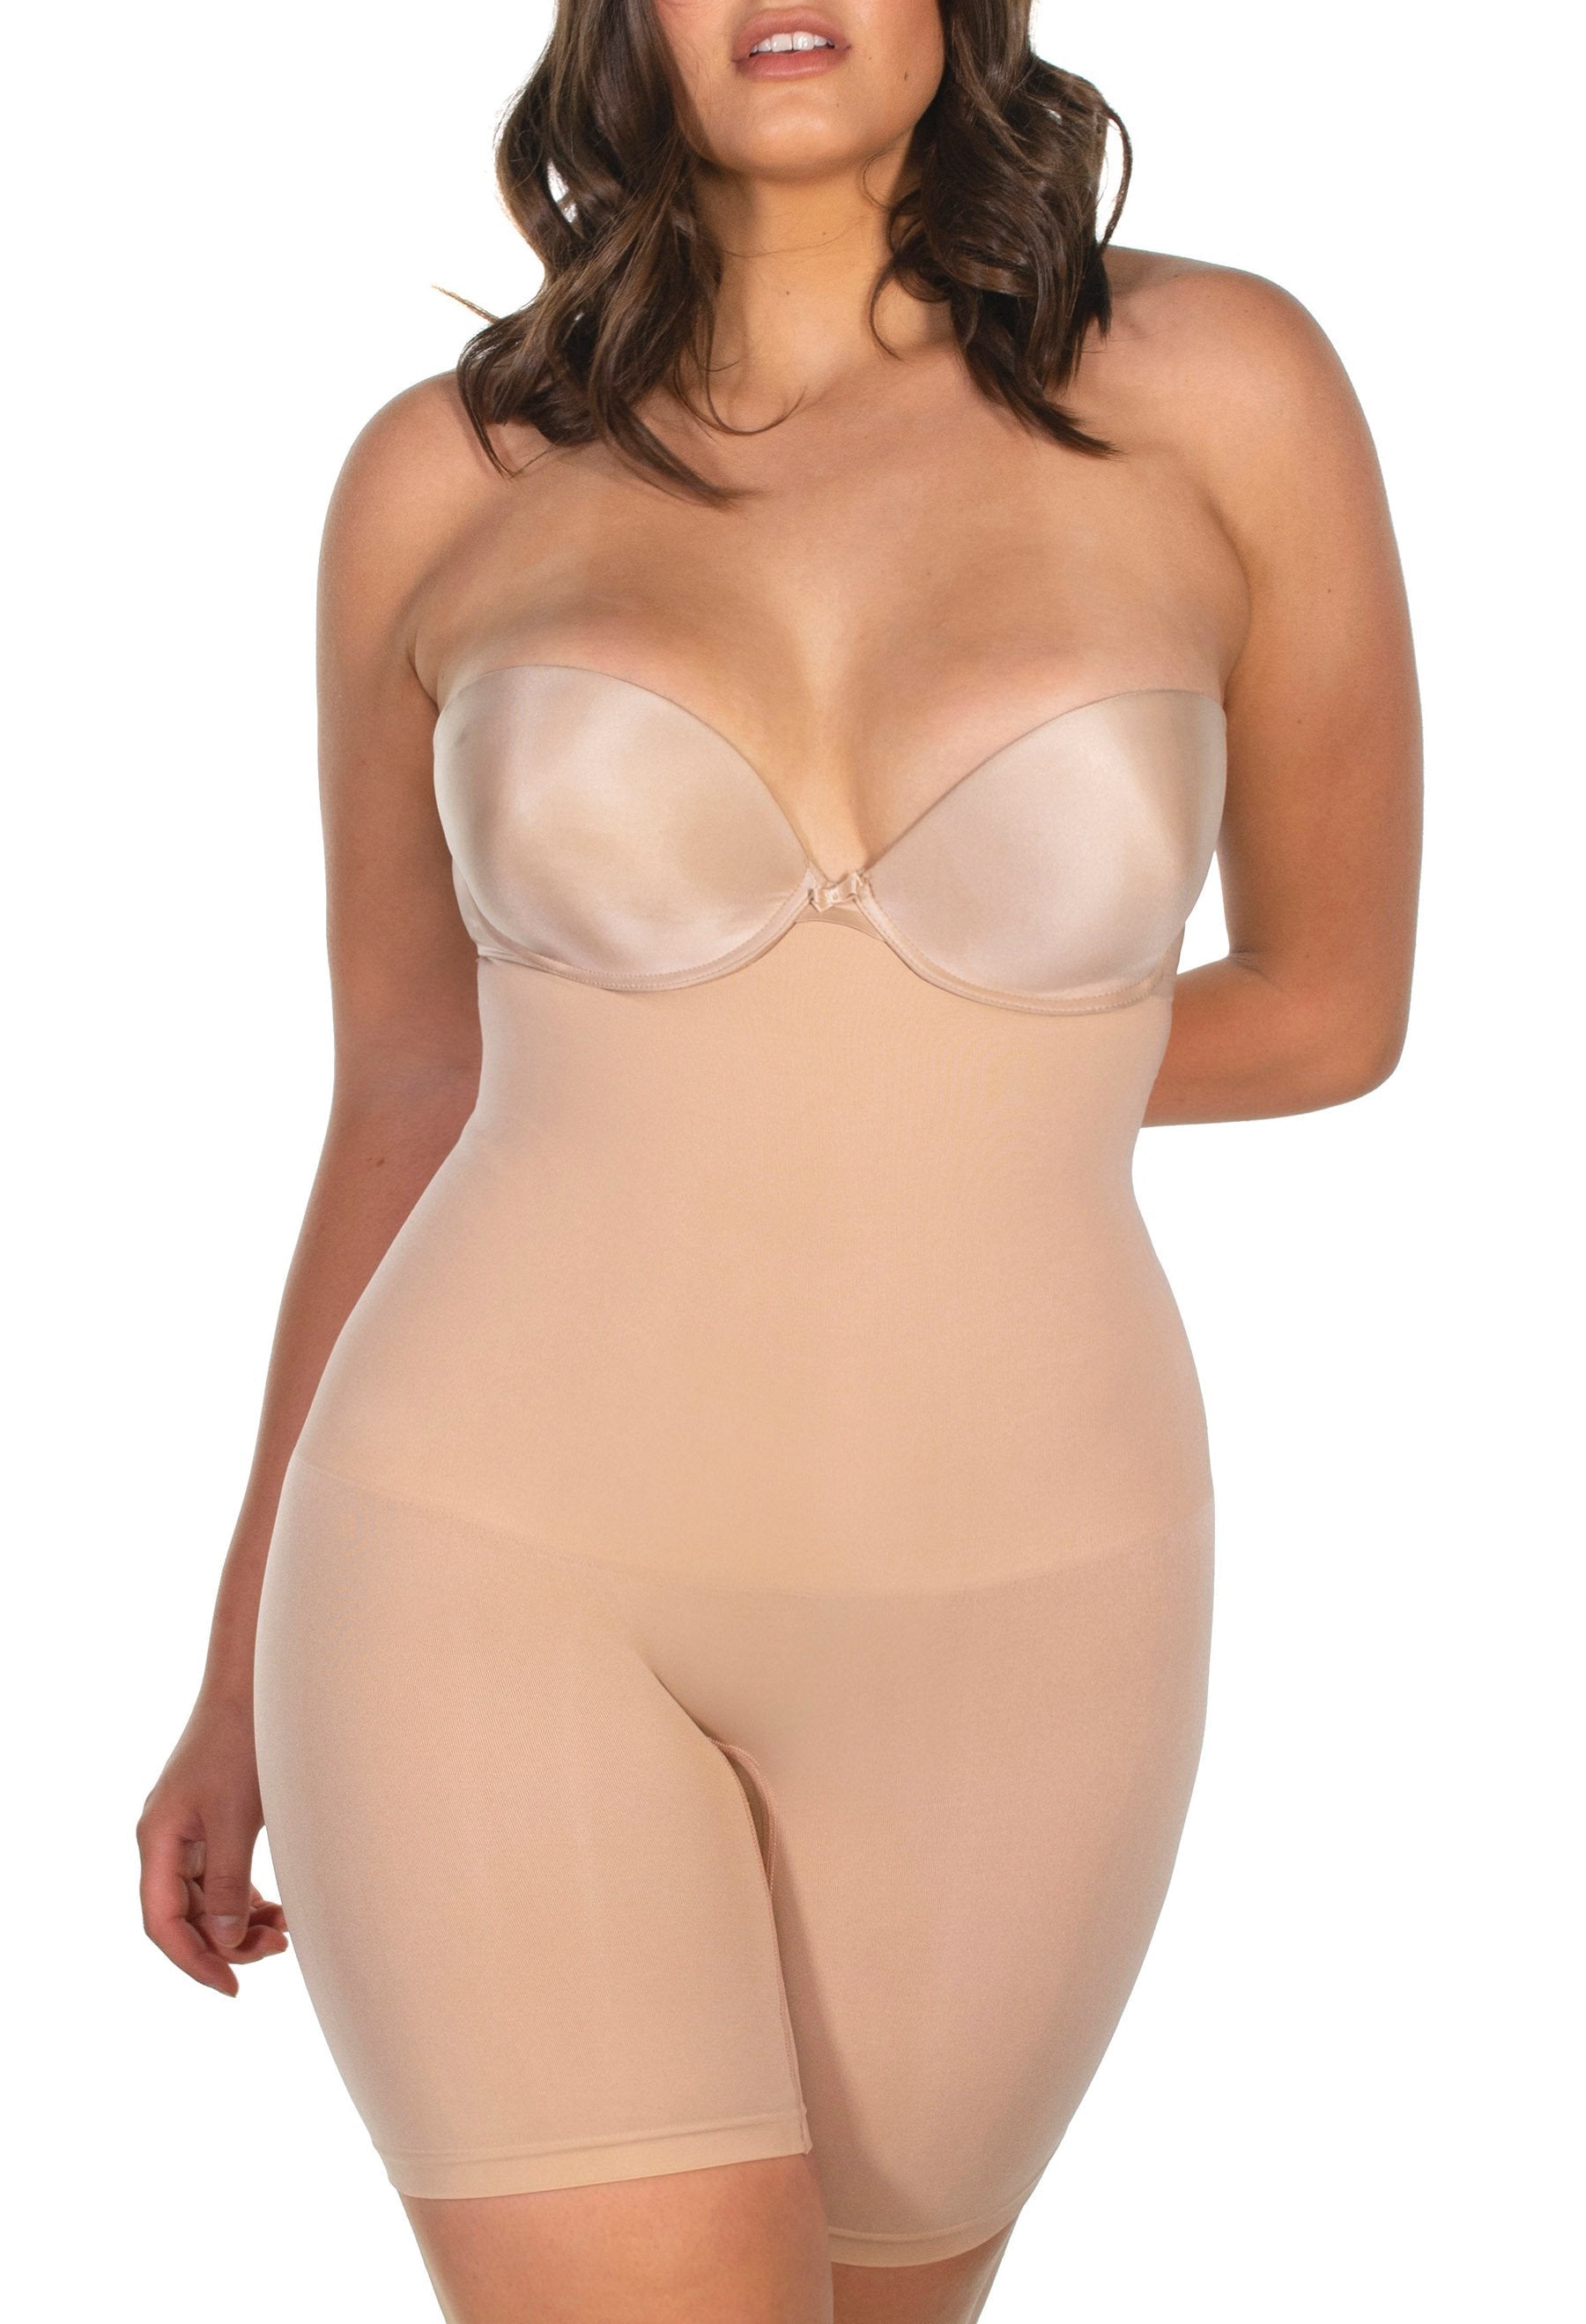 Spanx for Women Lightweight Layer High-Waisted Mid-Thigh Shaping